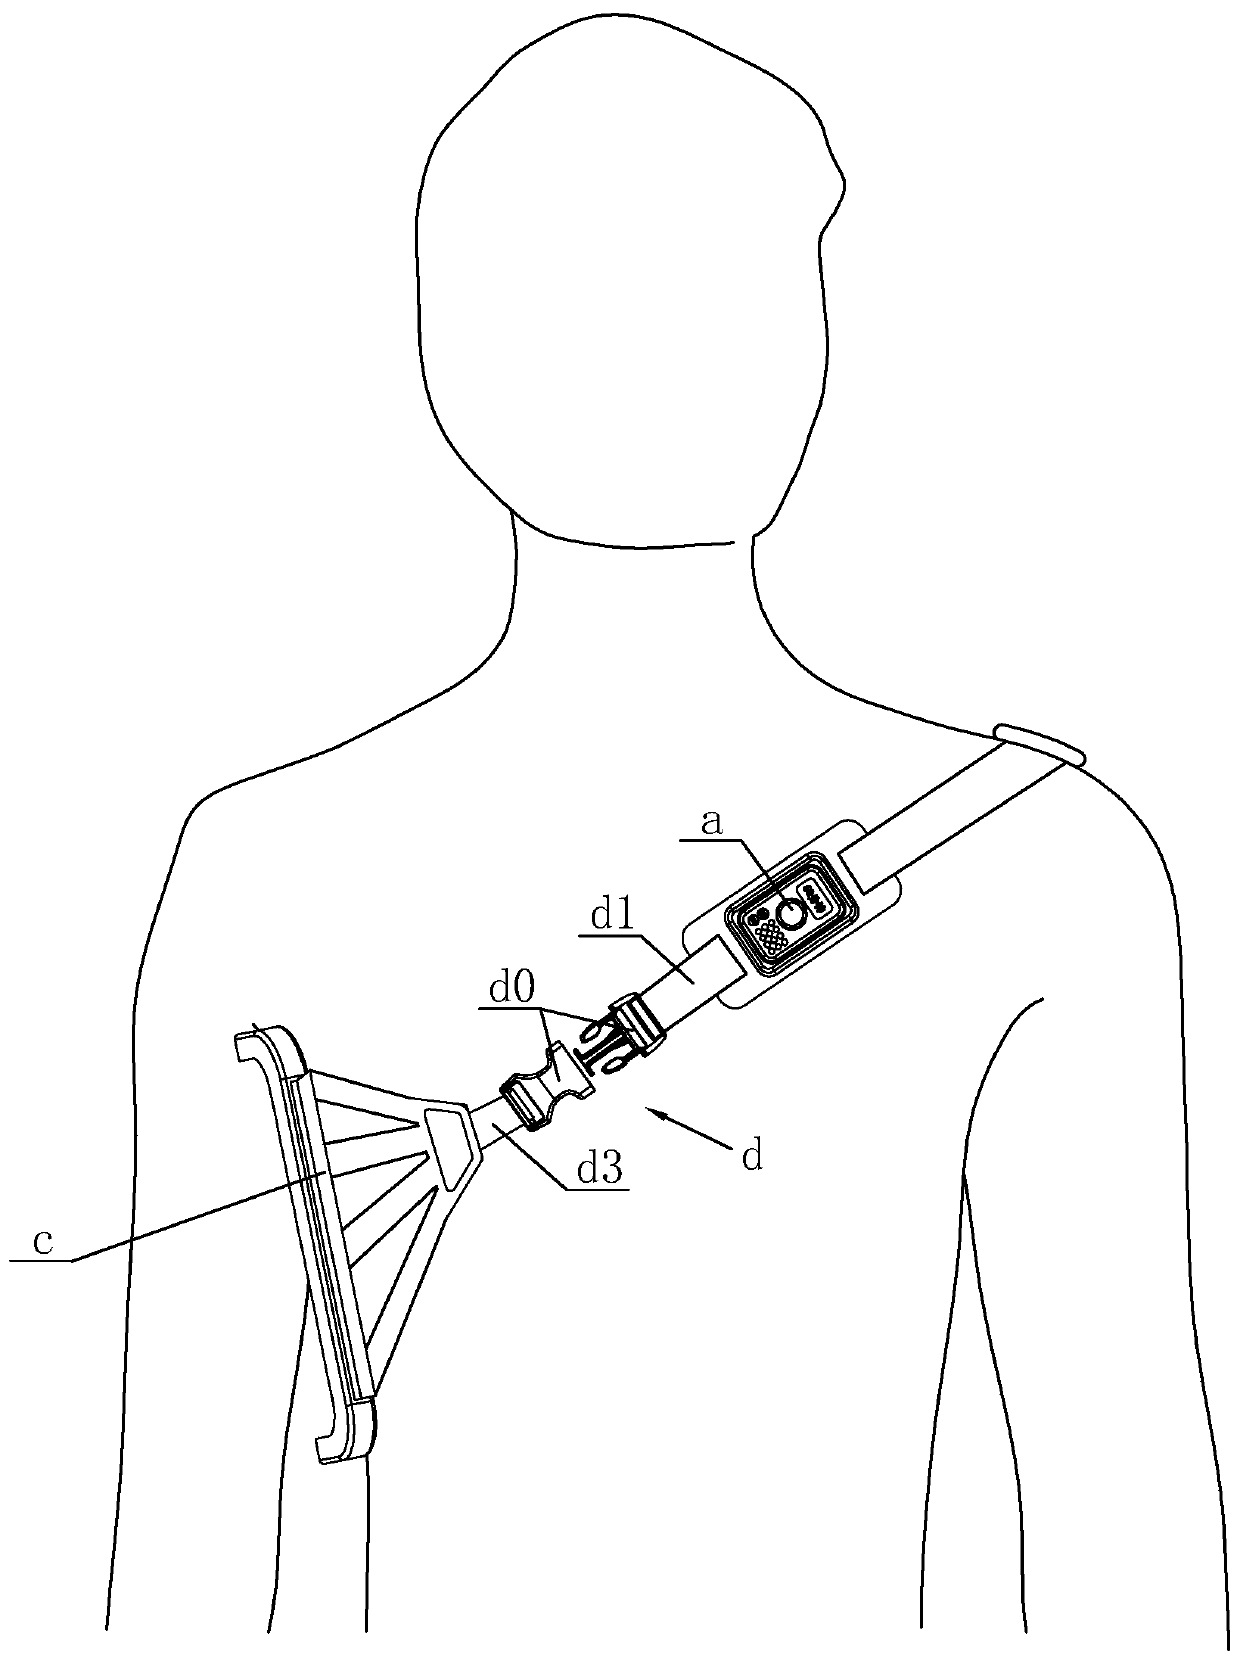 Pacemaker implantation postoperative compression device